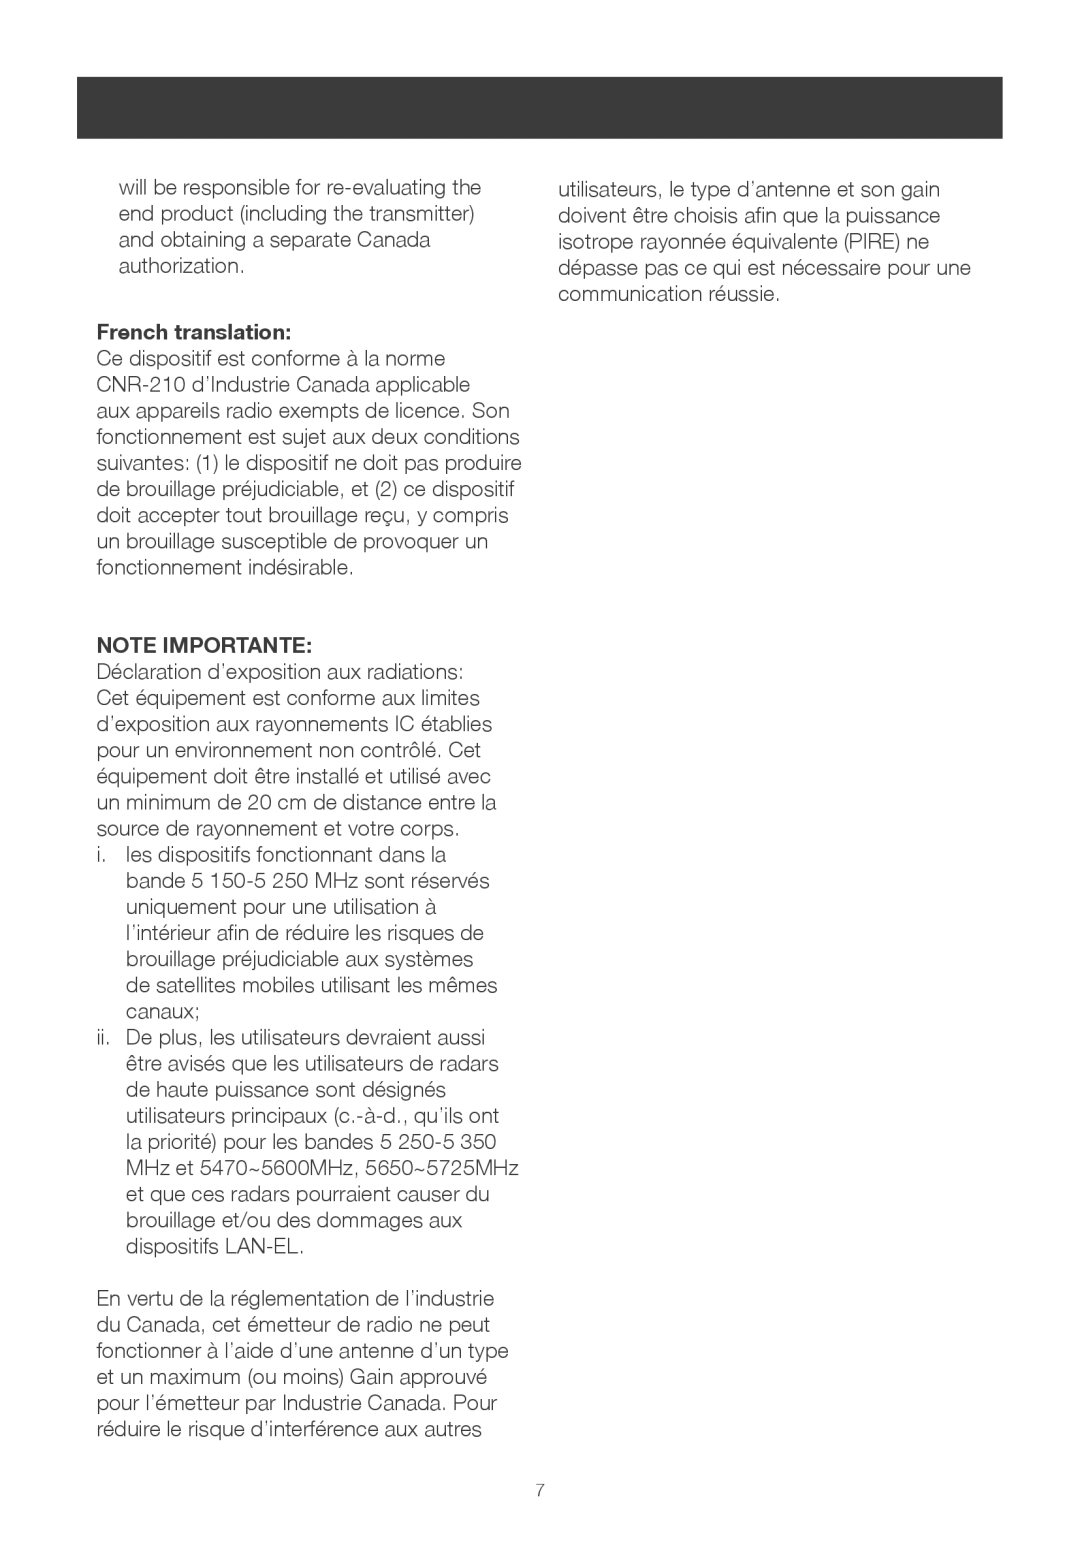 IOGear GWHDMS52 user manual French translation, Note Importante 